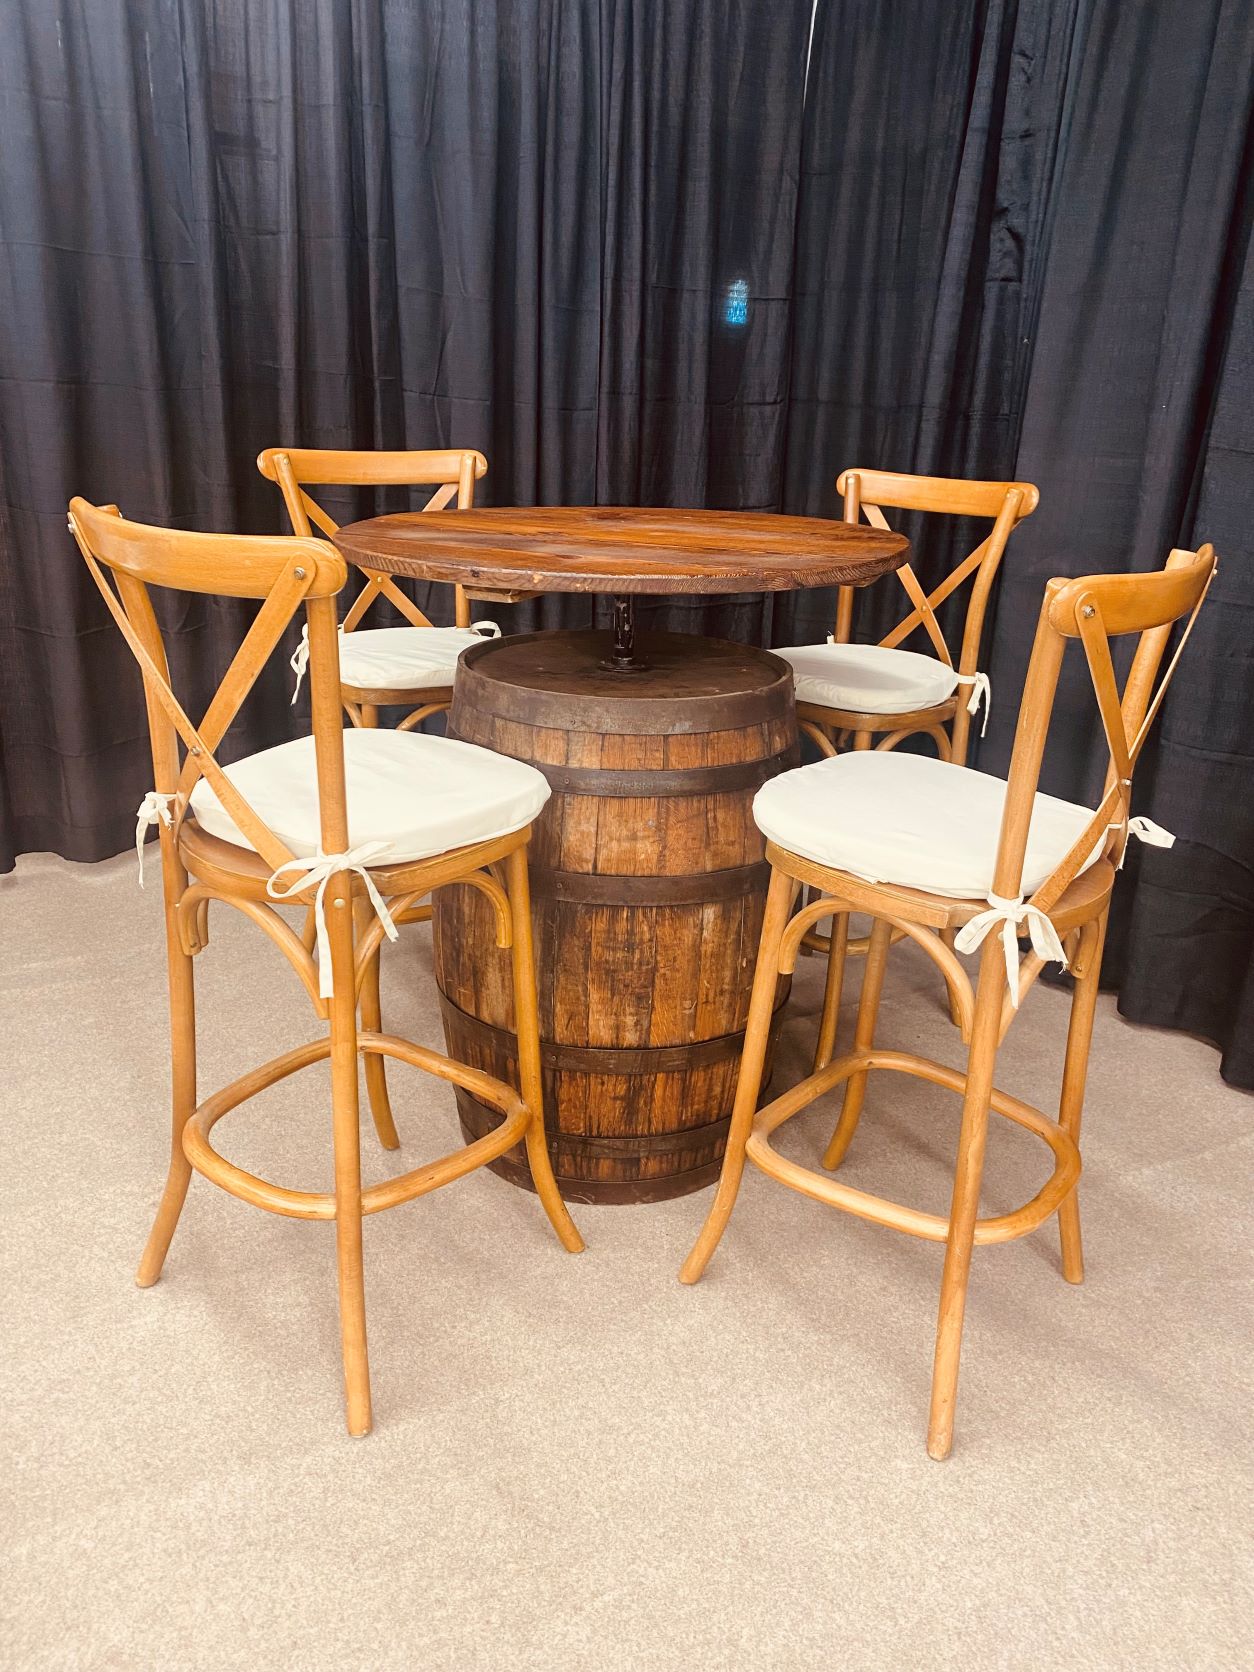 Whiskey Barrel Hightop with Cross Back Hightop Chairs